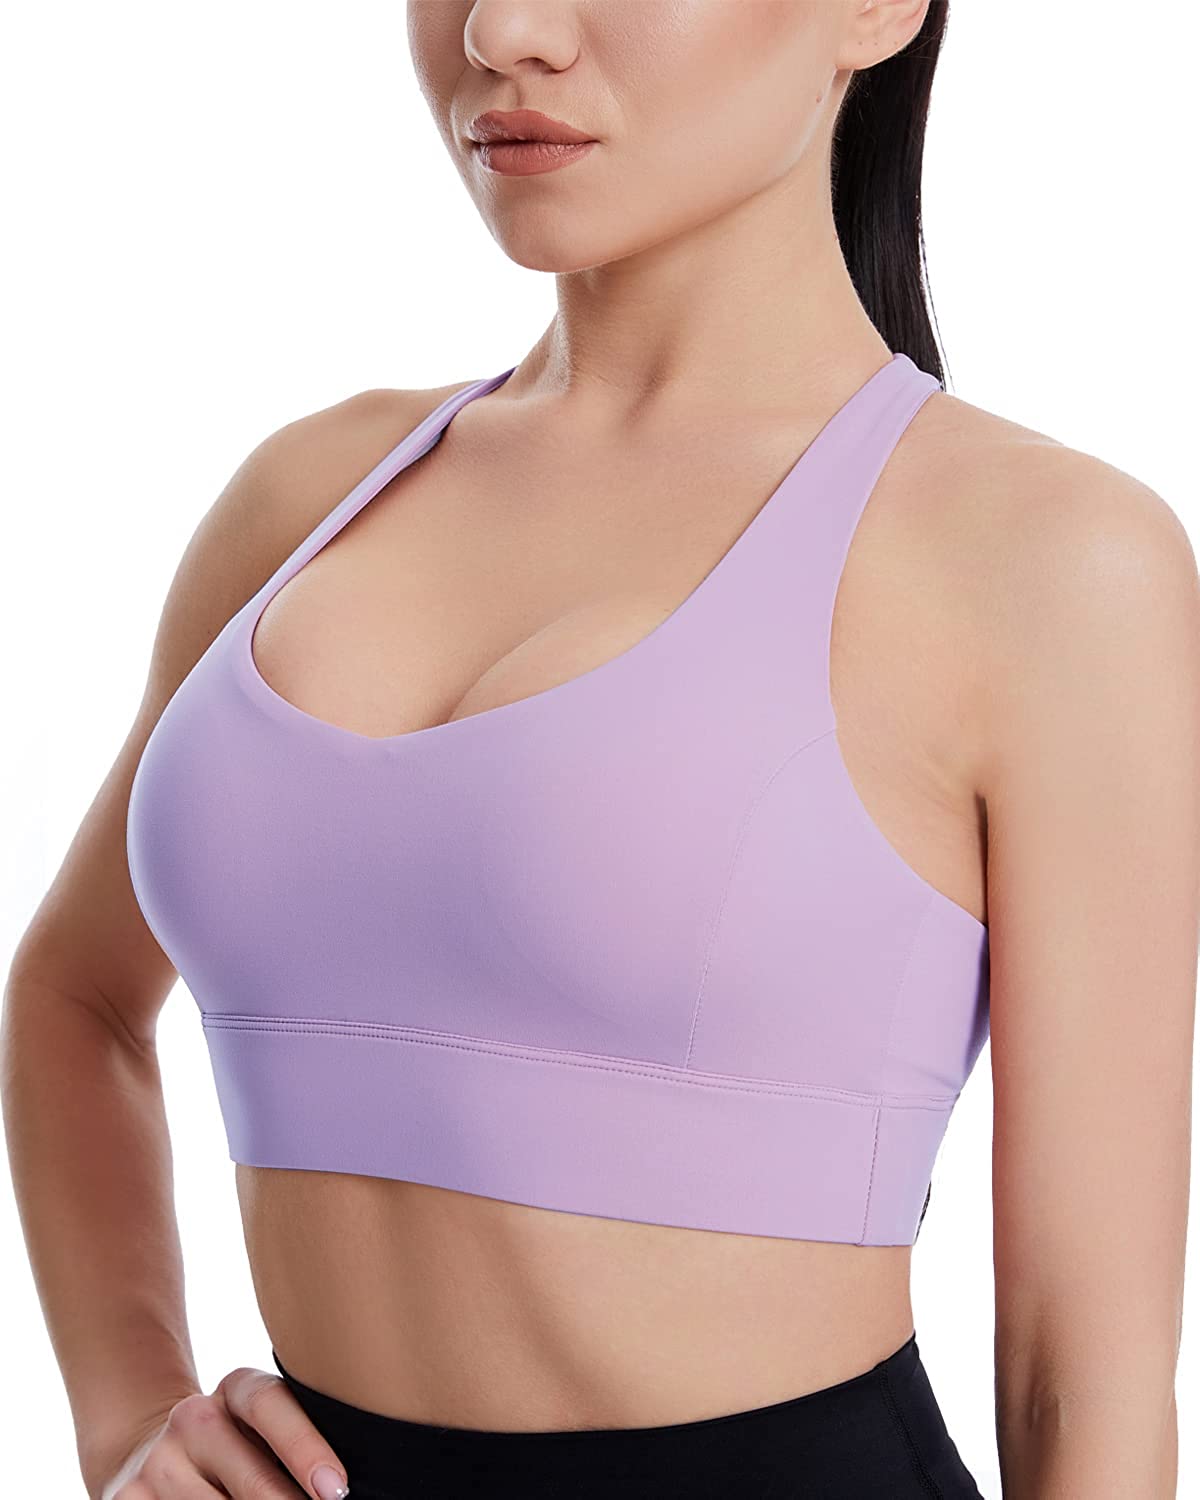 Grace Form Strappy Sports Bra for Women, Padded High Impact Push Up Athletic  Run